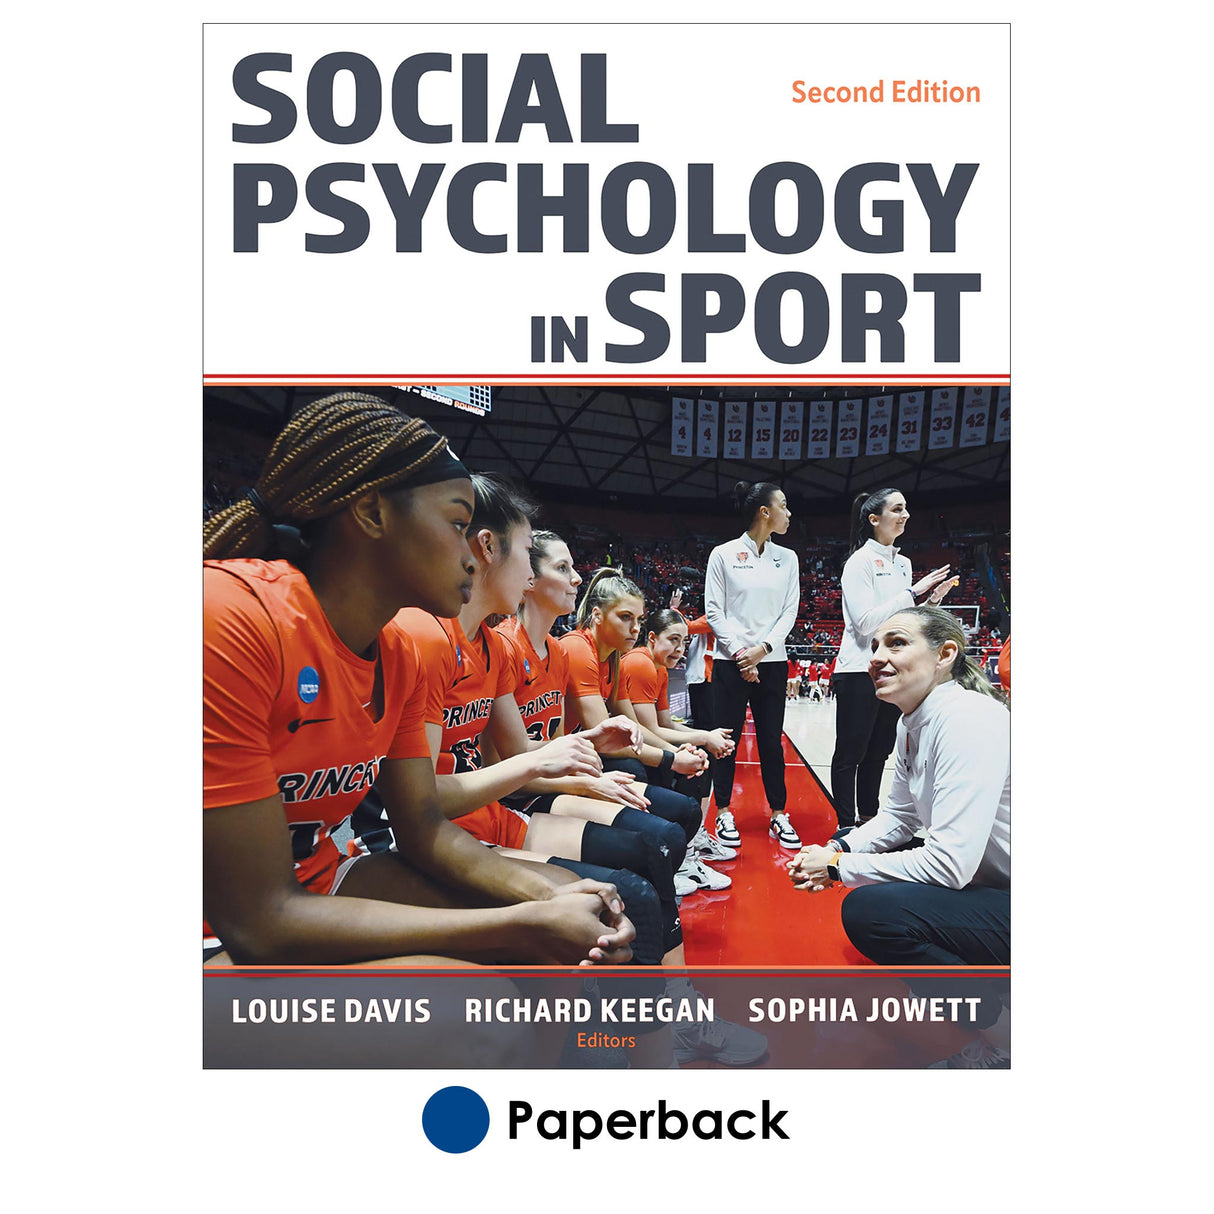 Social Psychology in Sport-2nd Edition